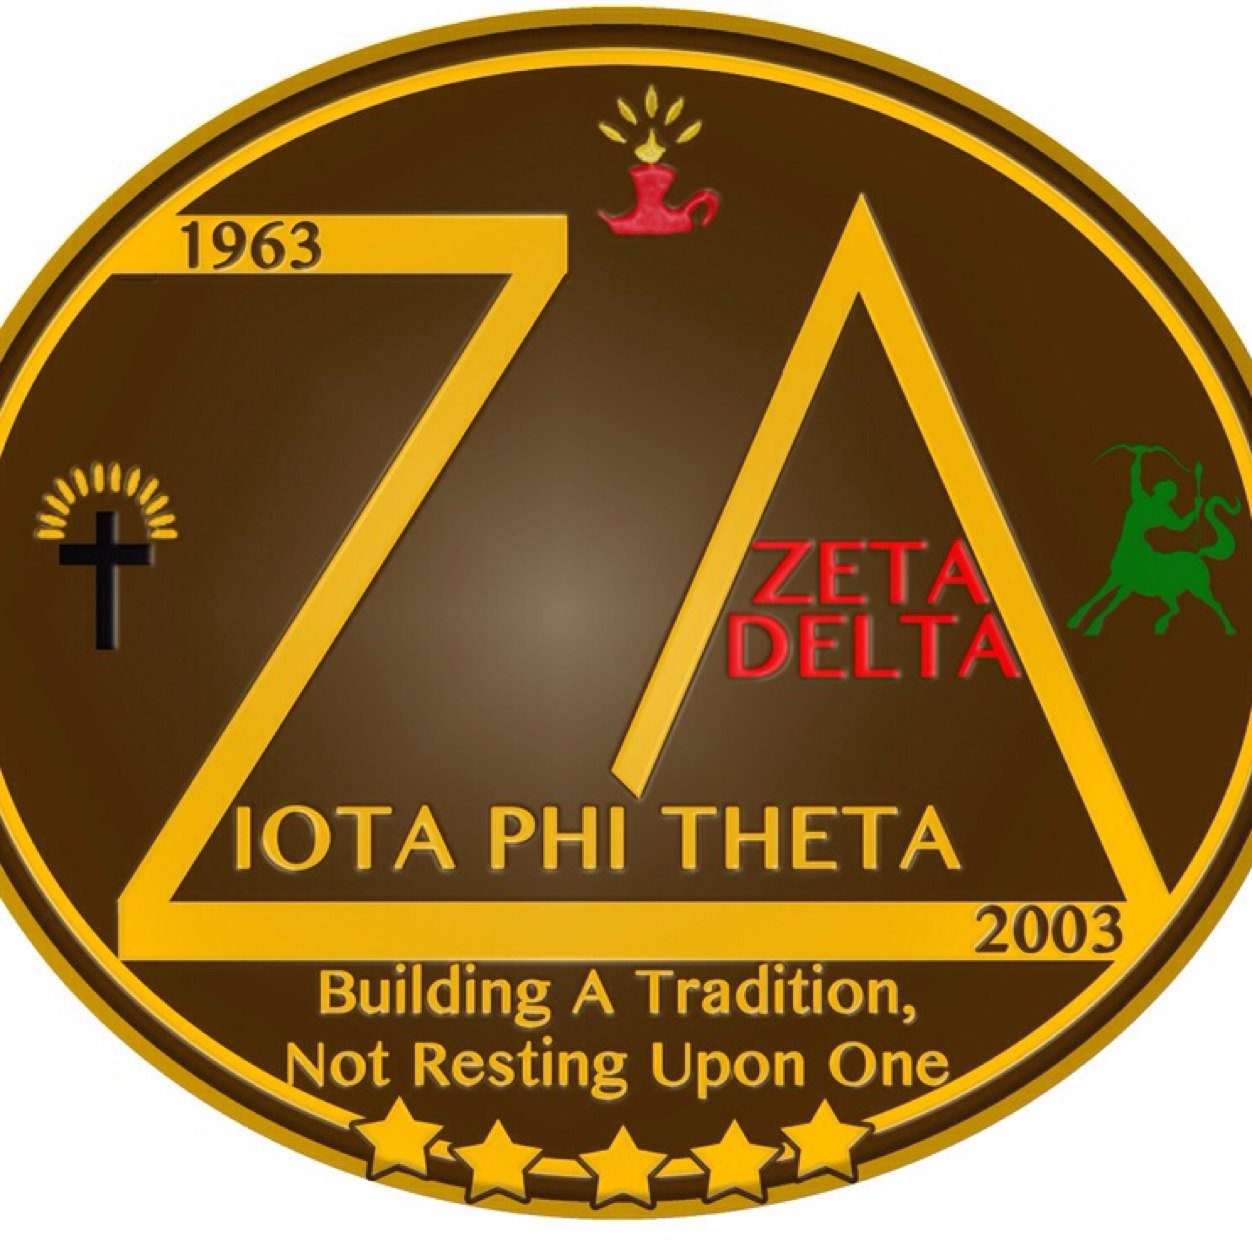 The Zeta Delta Chapter of Iota Phi Theta Fraternity Inc.|| BUILDING A TRADITION, NOT RESTING UPON ONE! || Est Nov 7, 2003